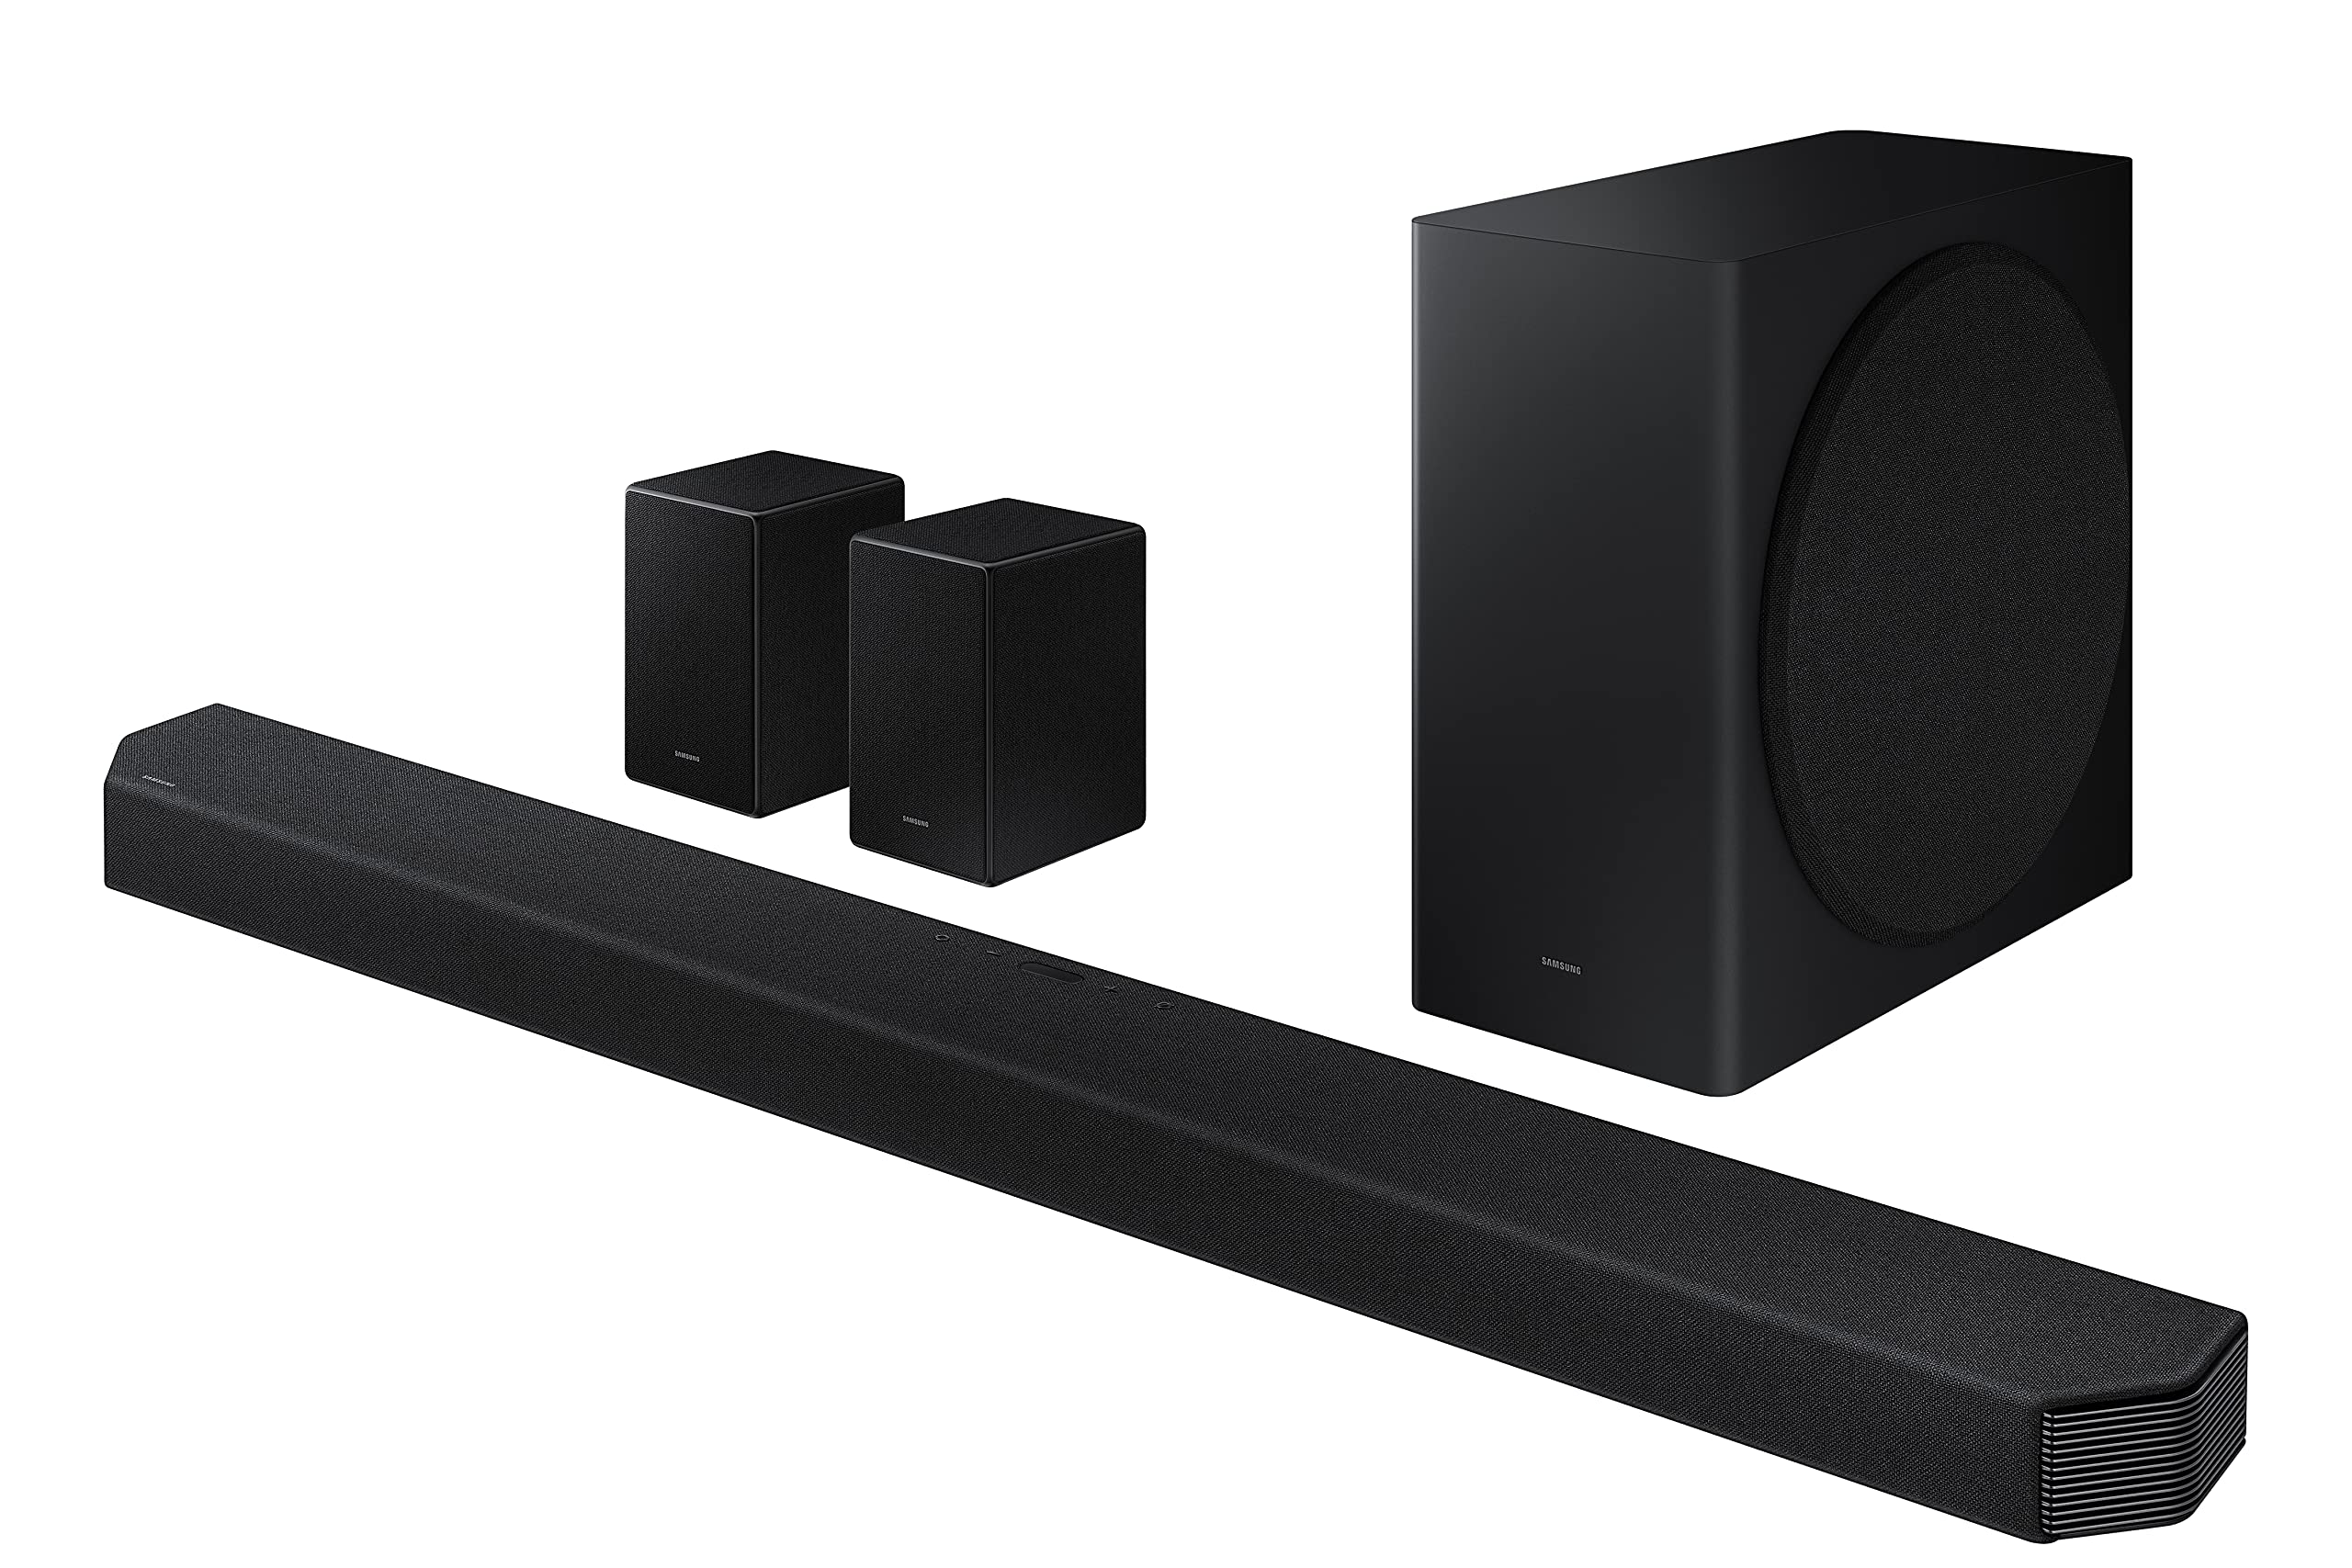 Samsung Q950A Soundbar Speaker With Wireless Subwoofer & Rear Speakers (2021) - 11.1.4ch Dolby Atmos Sound System With DTS:X, Spacefit Sound, Built In Alexa & Airplay, Adaptive Sound & Q-Symphony